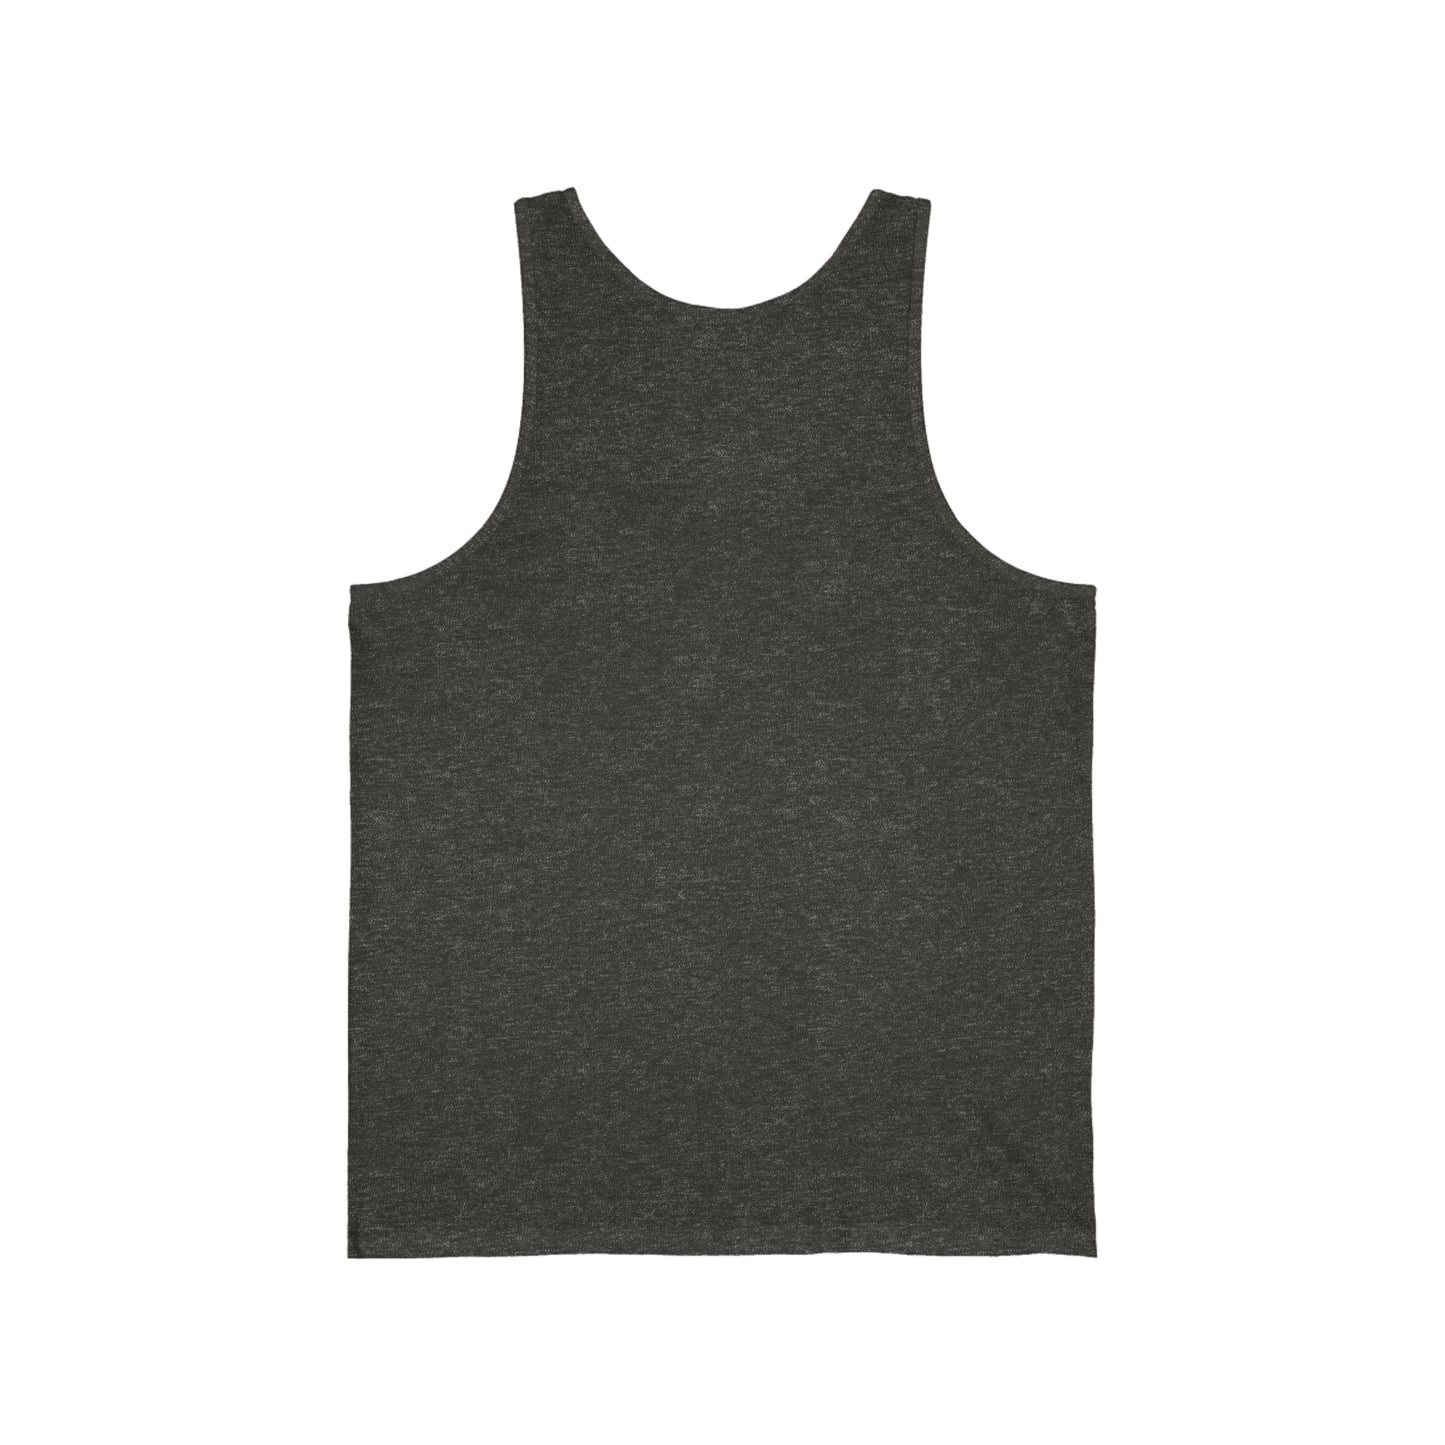 Hard to Hear Over All this Freedom Jersey Tank